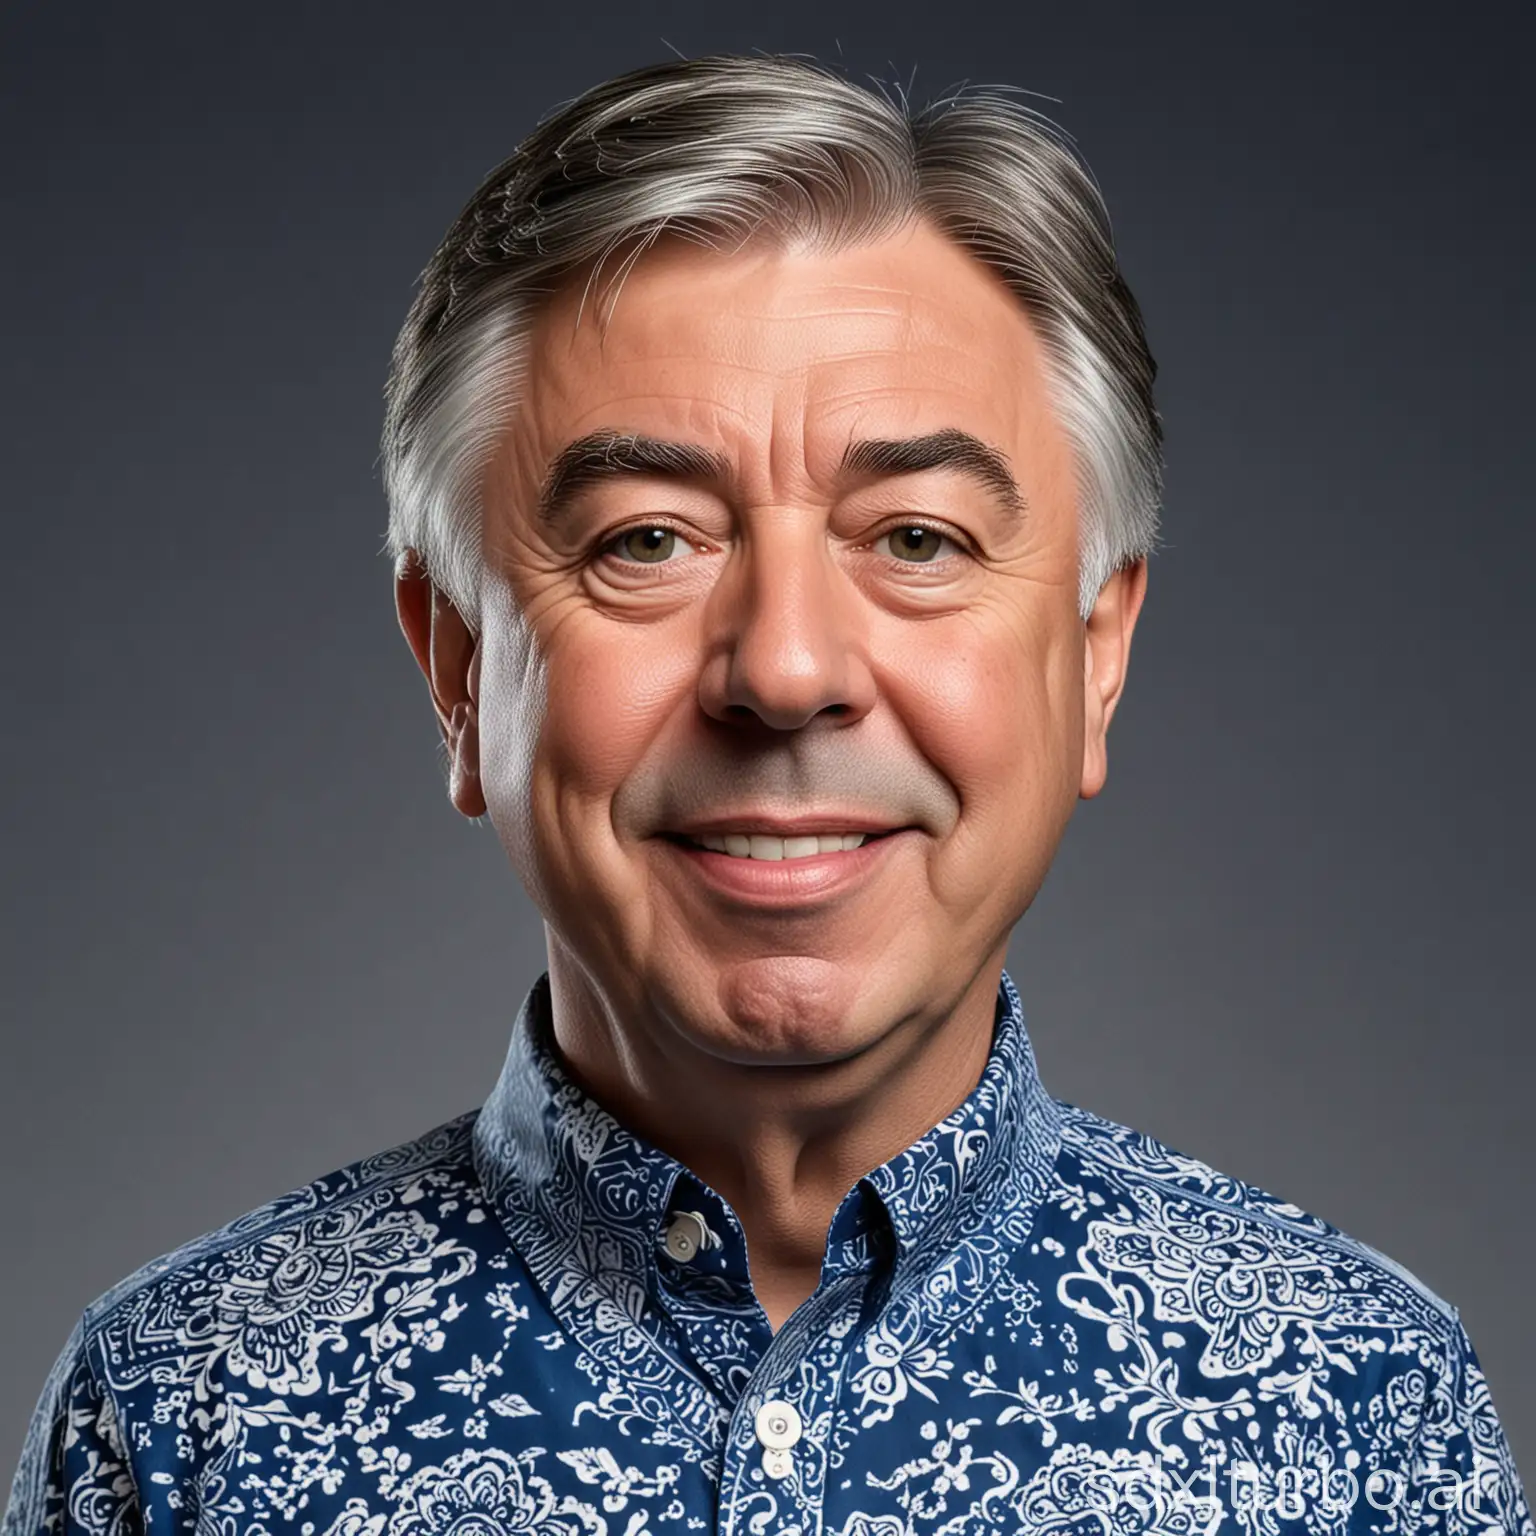 Caricature of Carlo Ancelotti, Wearing blue batik shirt with shanghai collar, posing for photo 3/4 front view